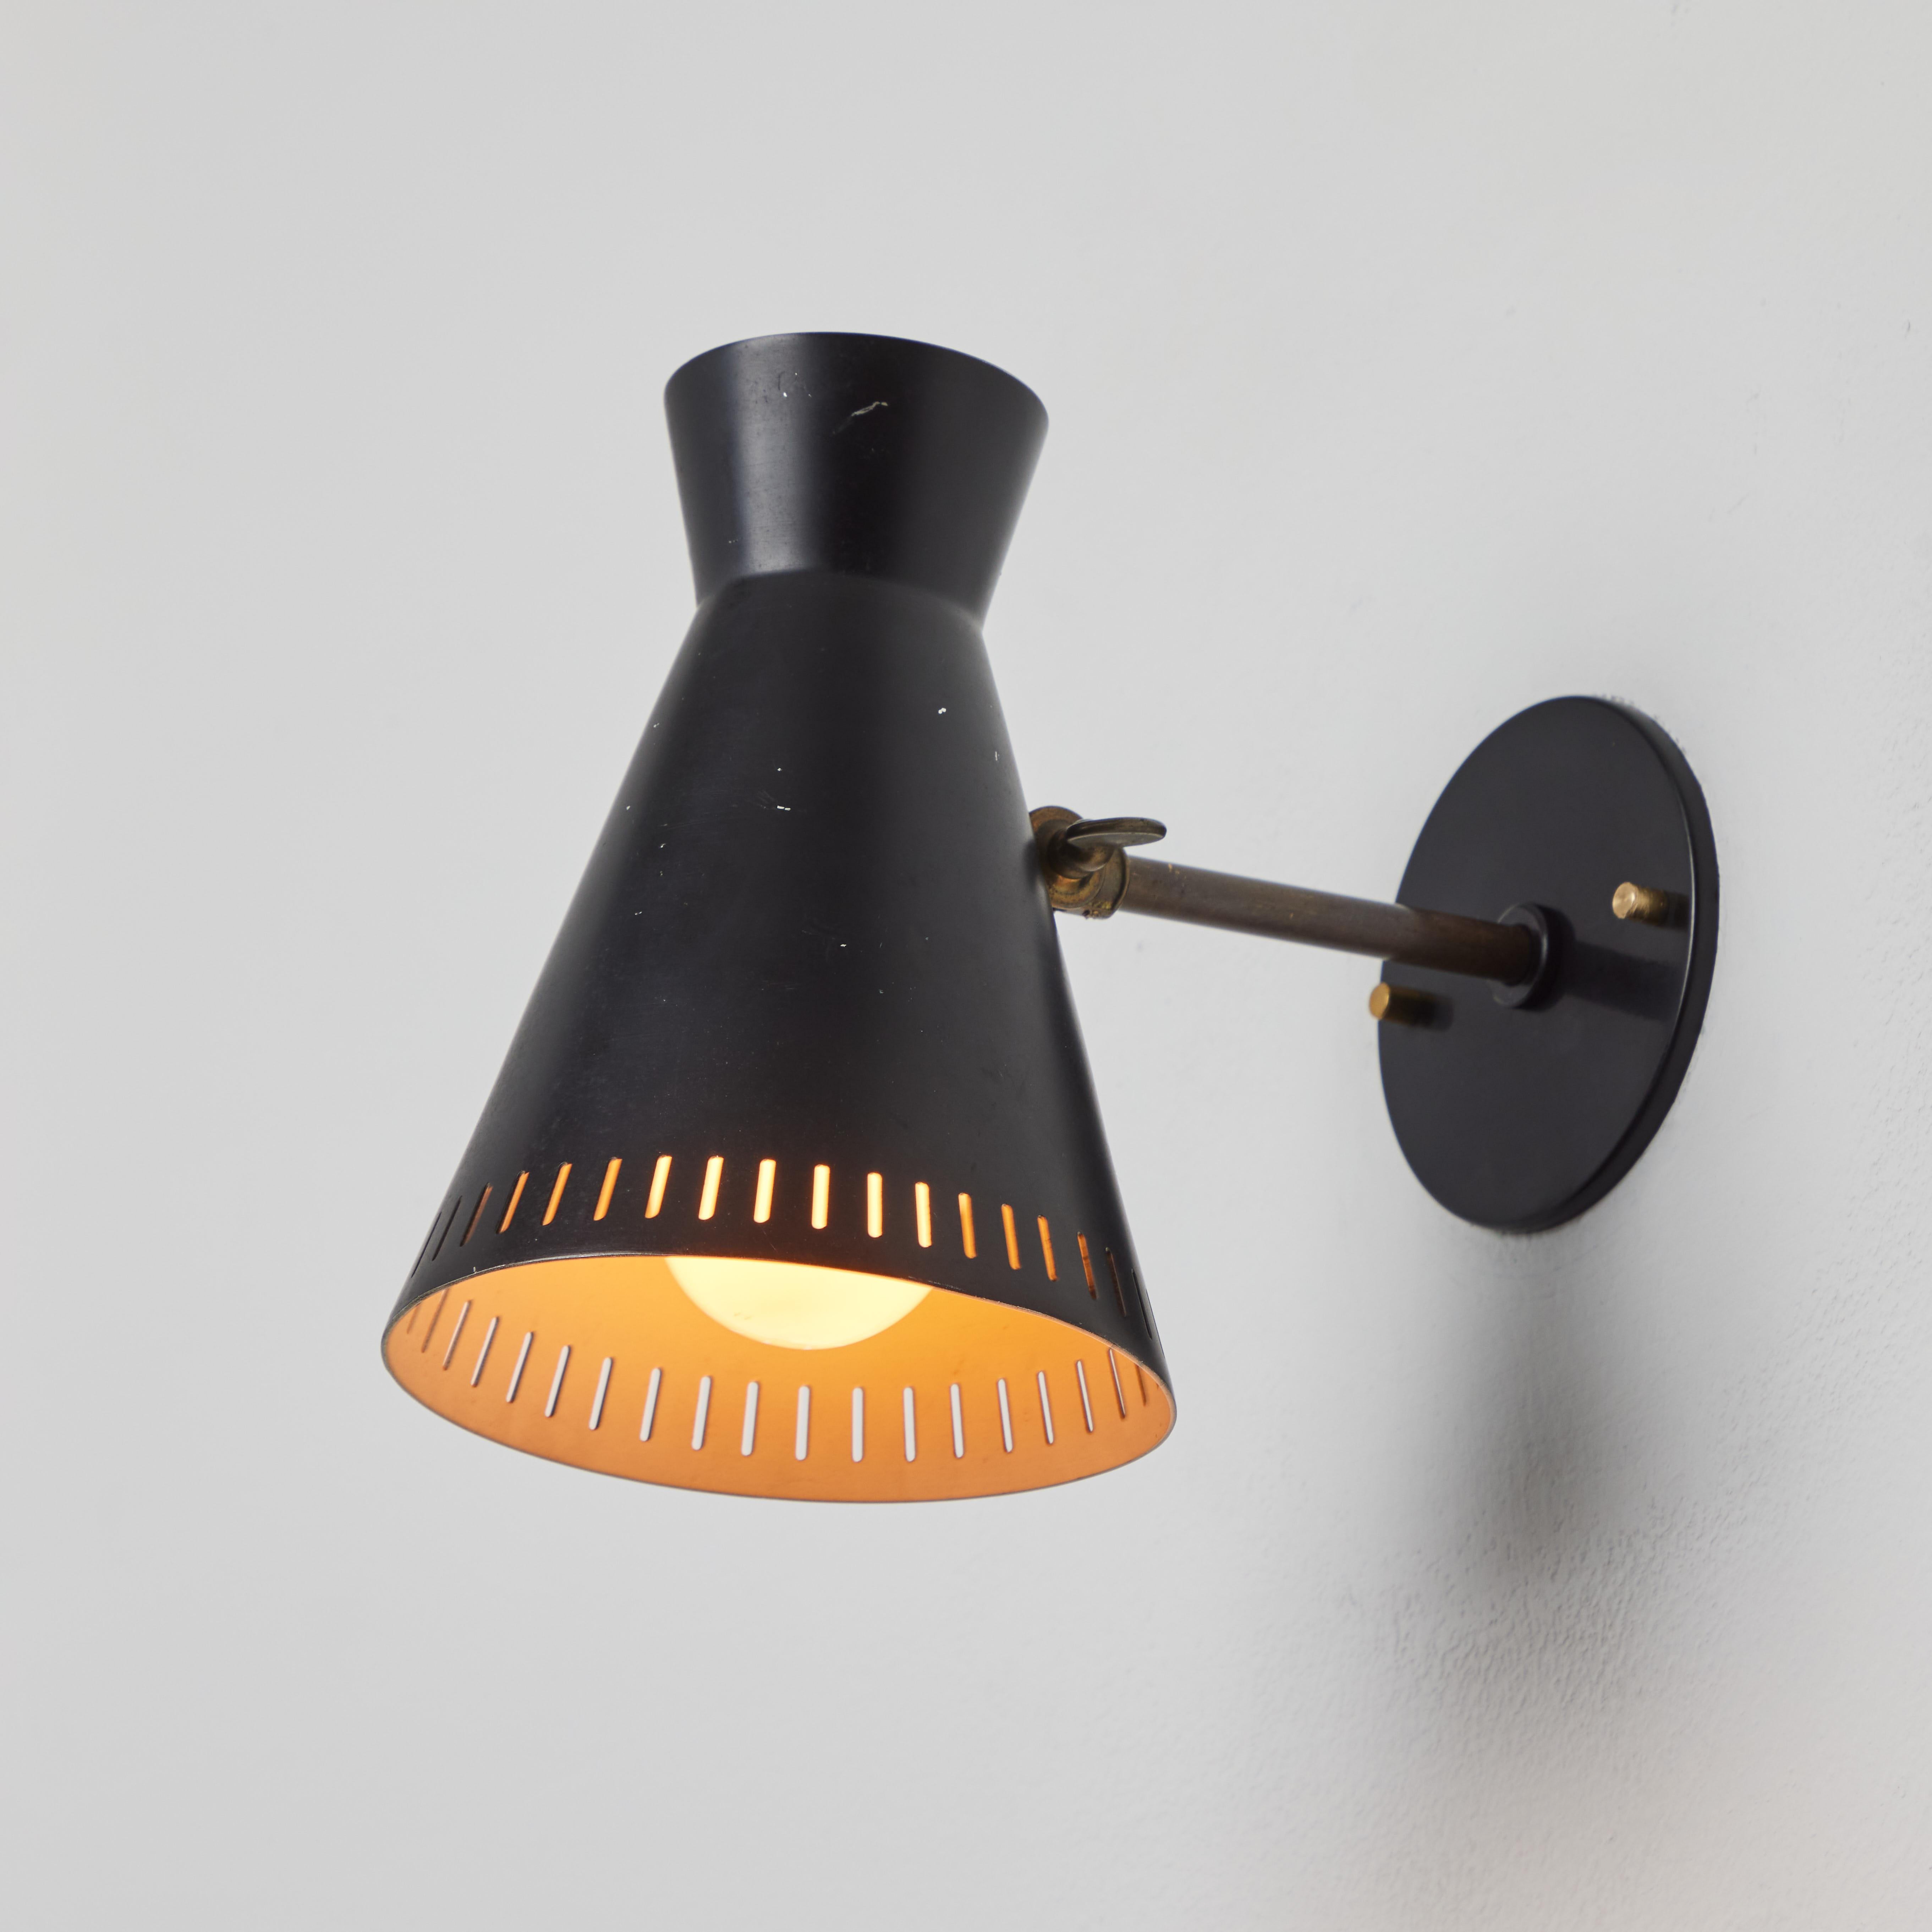 1950s Perforated Black Metal Diabolo Wall Lamp Attributed to Mauri Almari For Sale 7